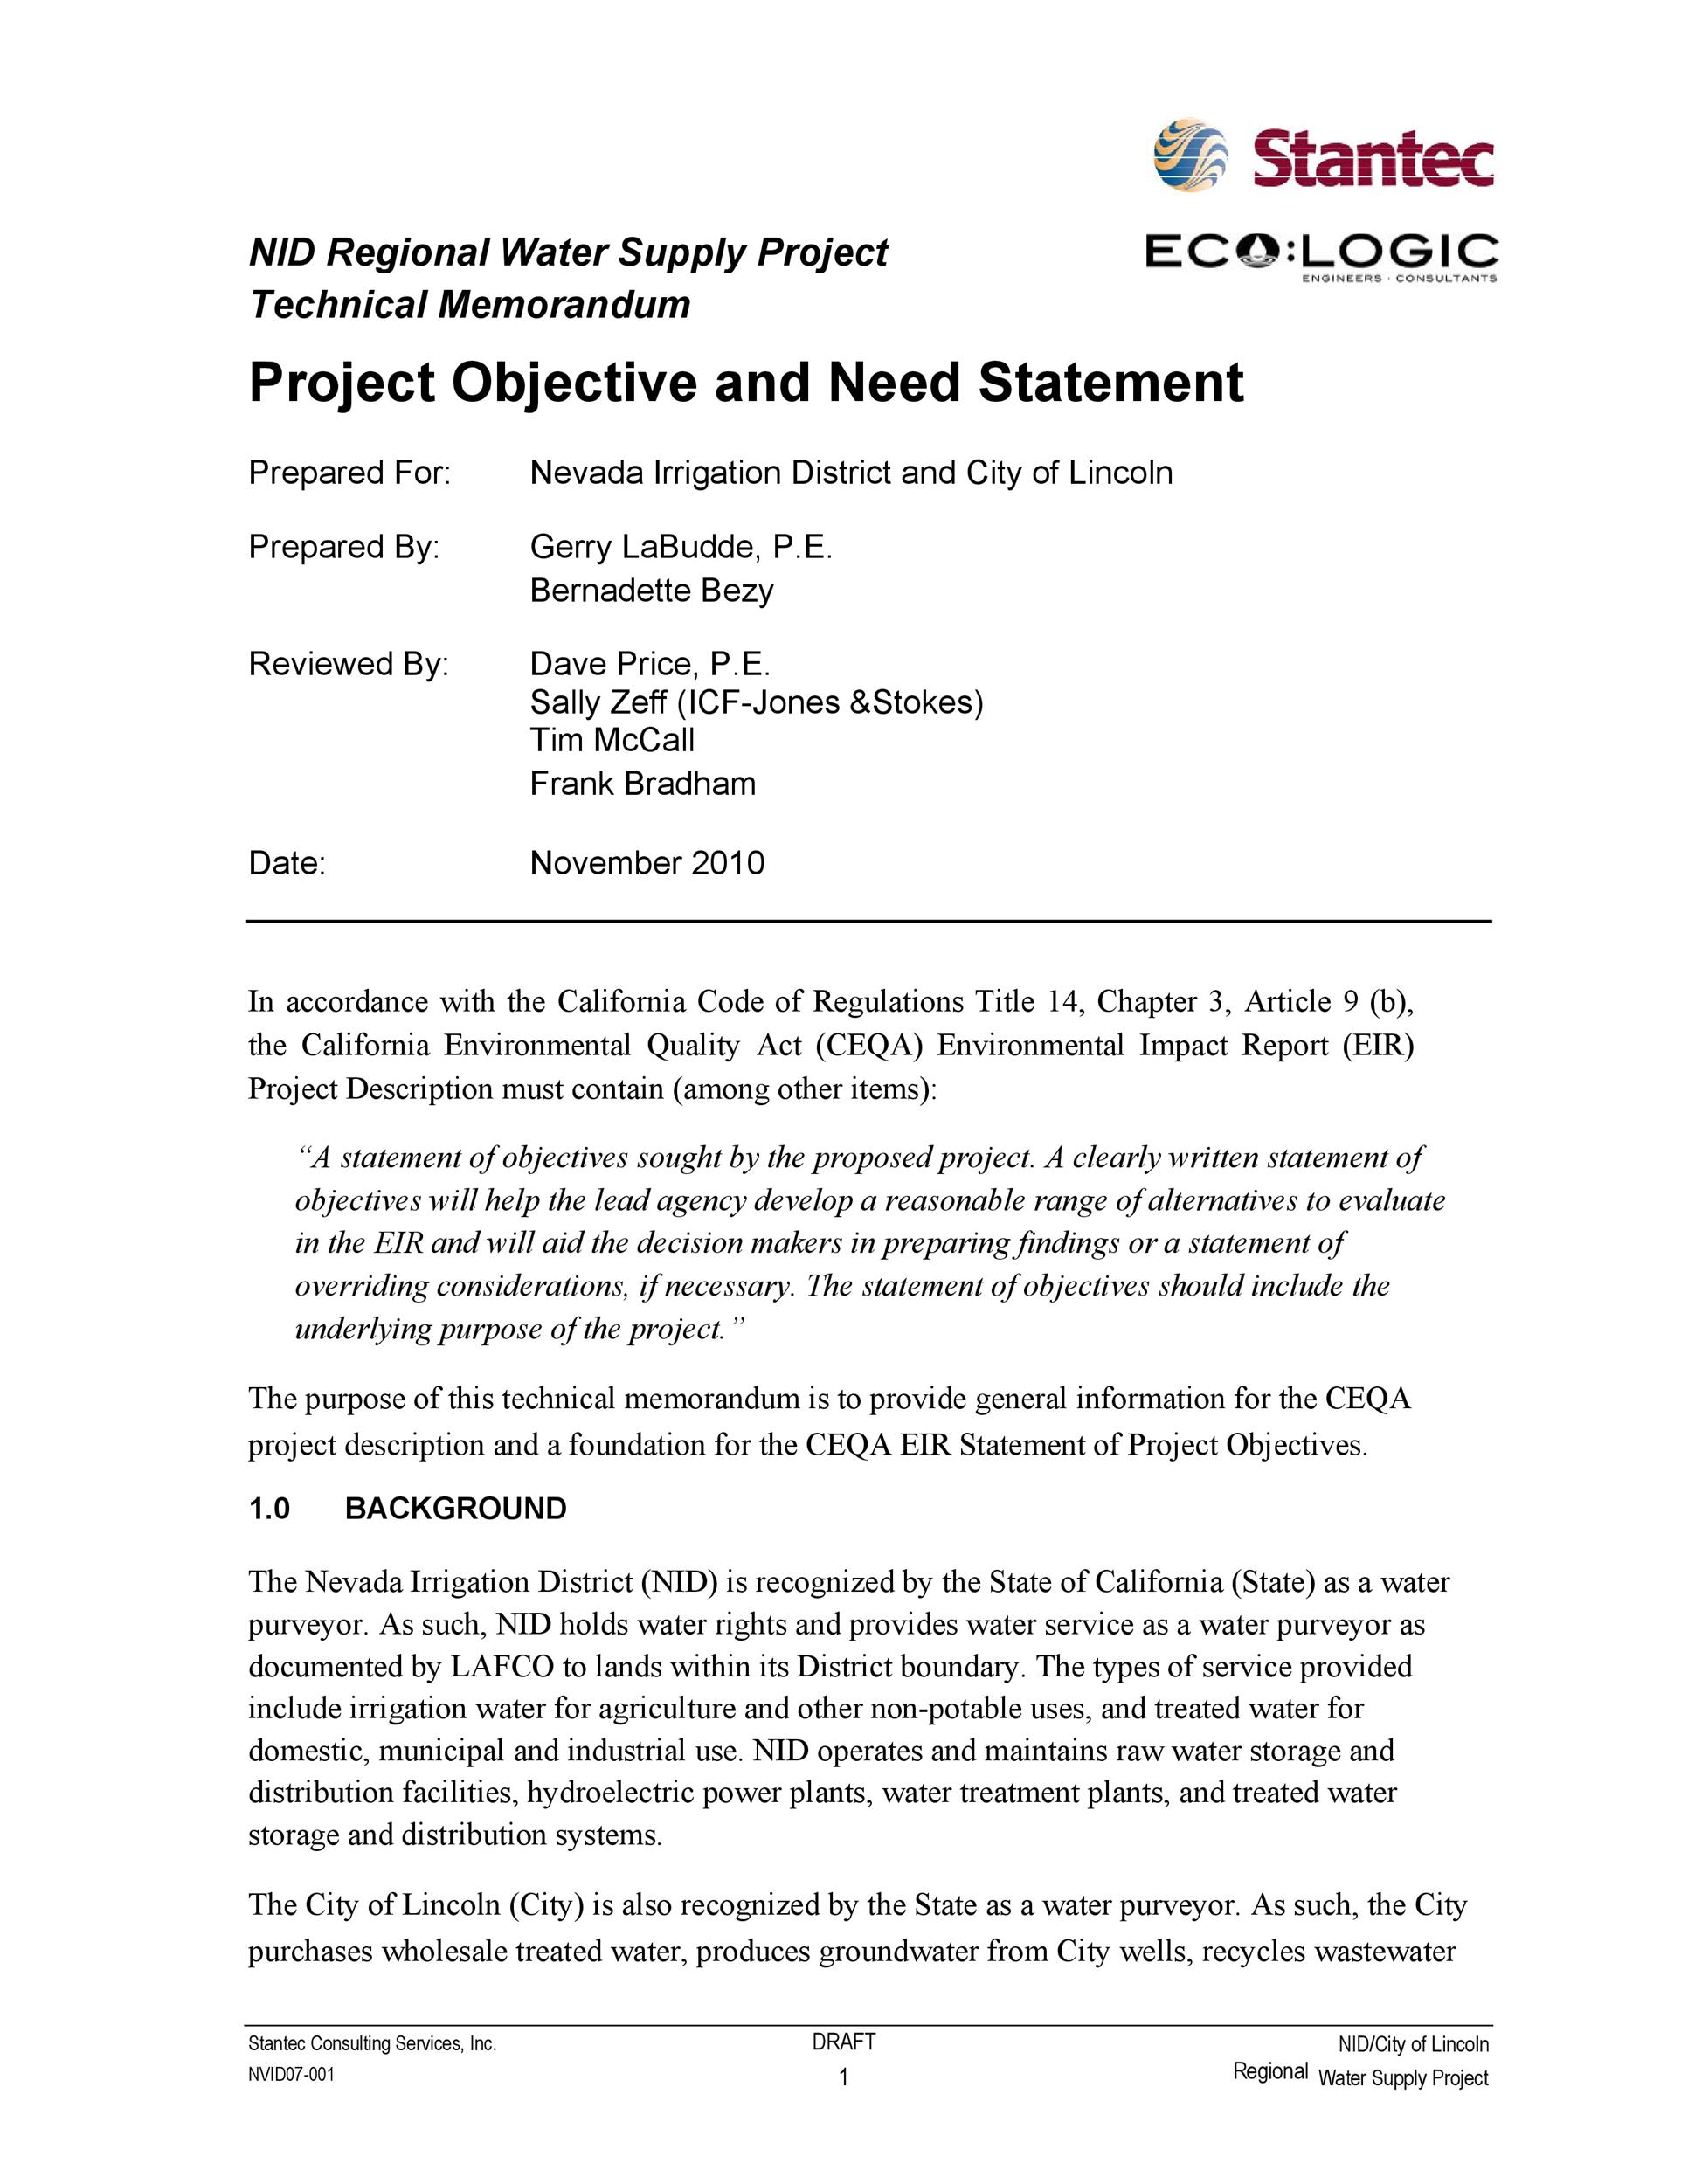 50 Effective Statement Of Need Templates (& Examples) ᐅ TemplateLab